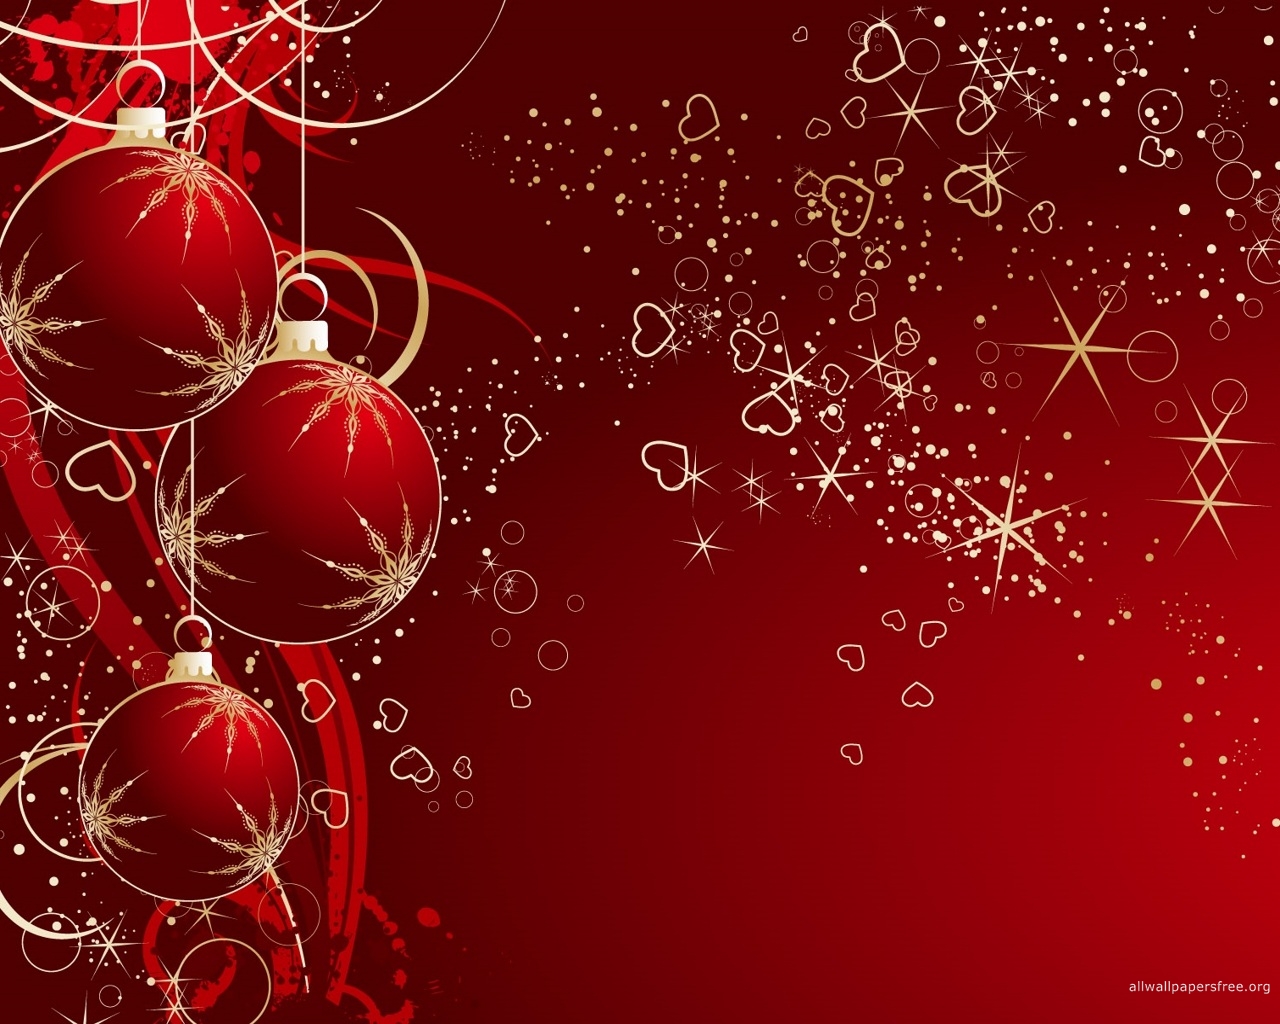 Christmas Holiday Wallpaper Backgrounds Free Best Hd Wallpapers